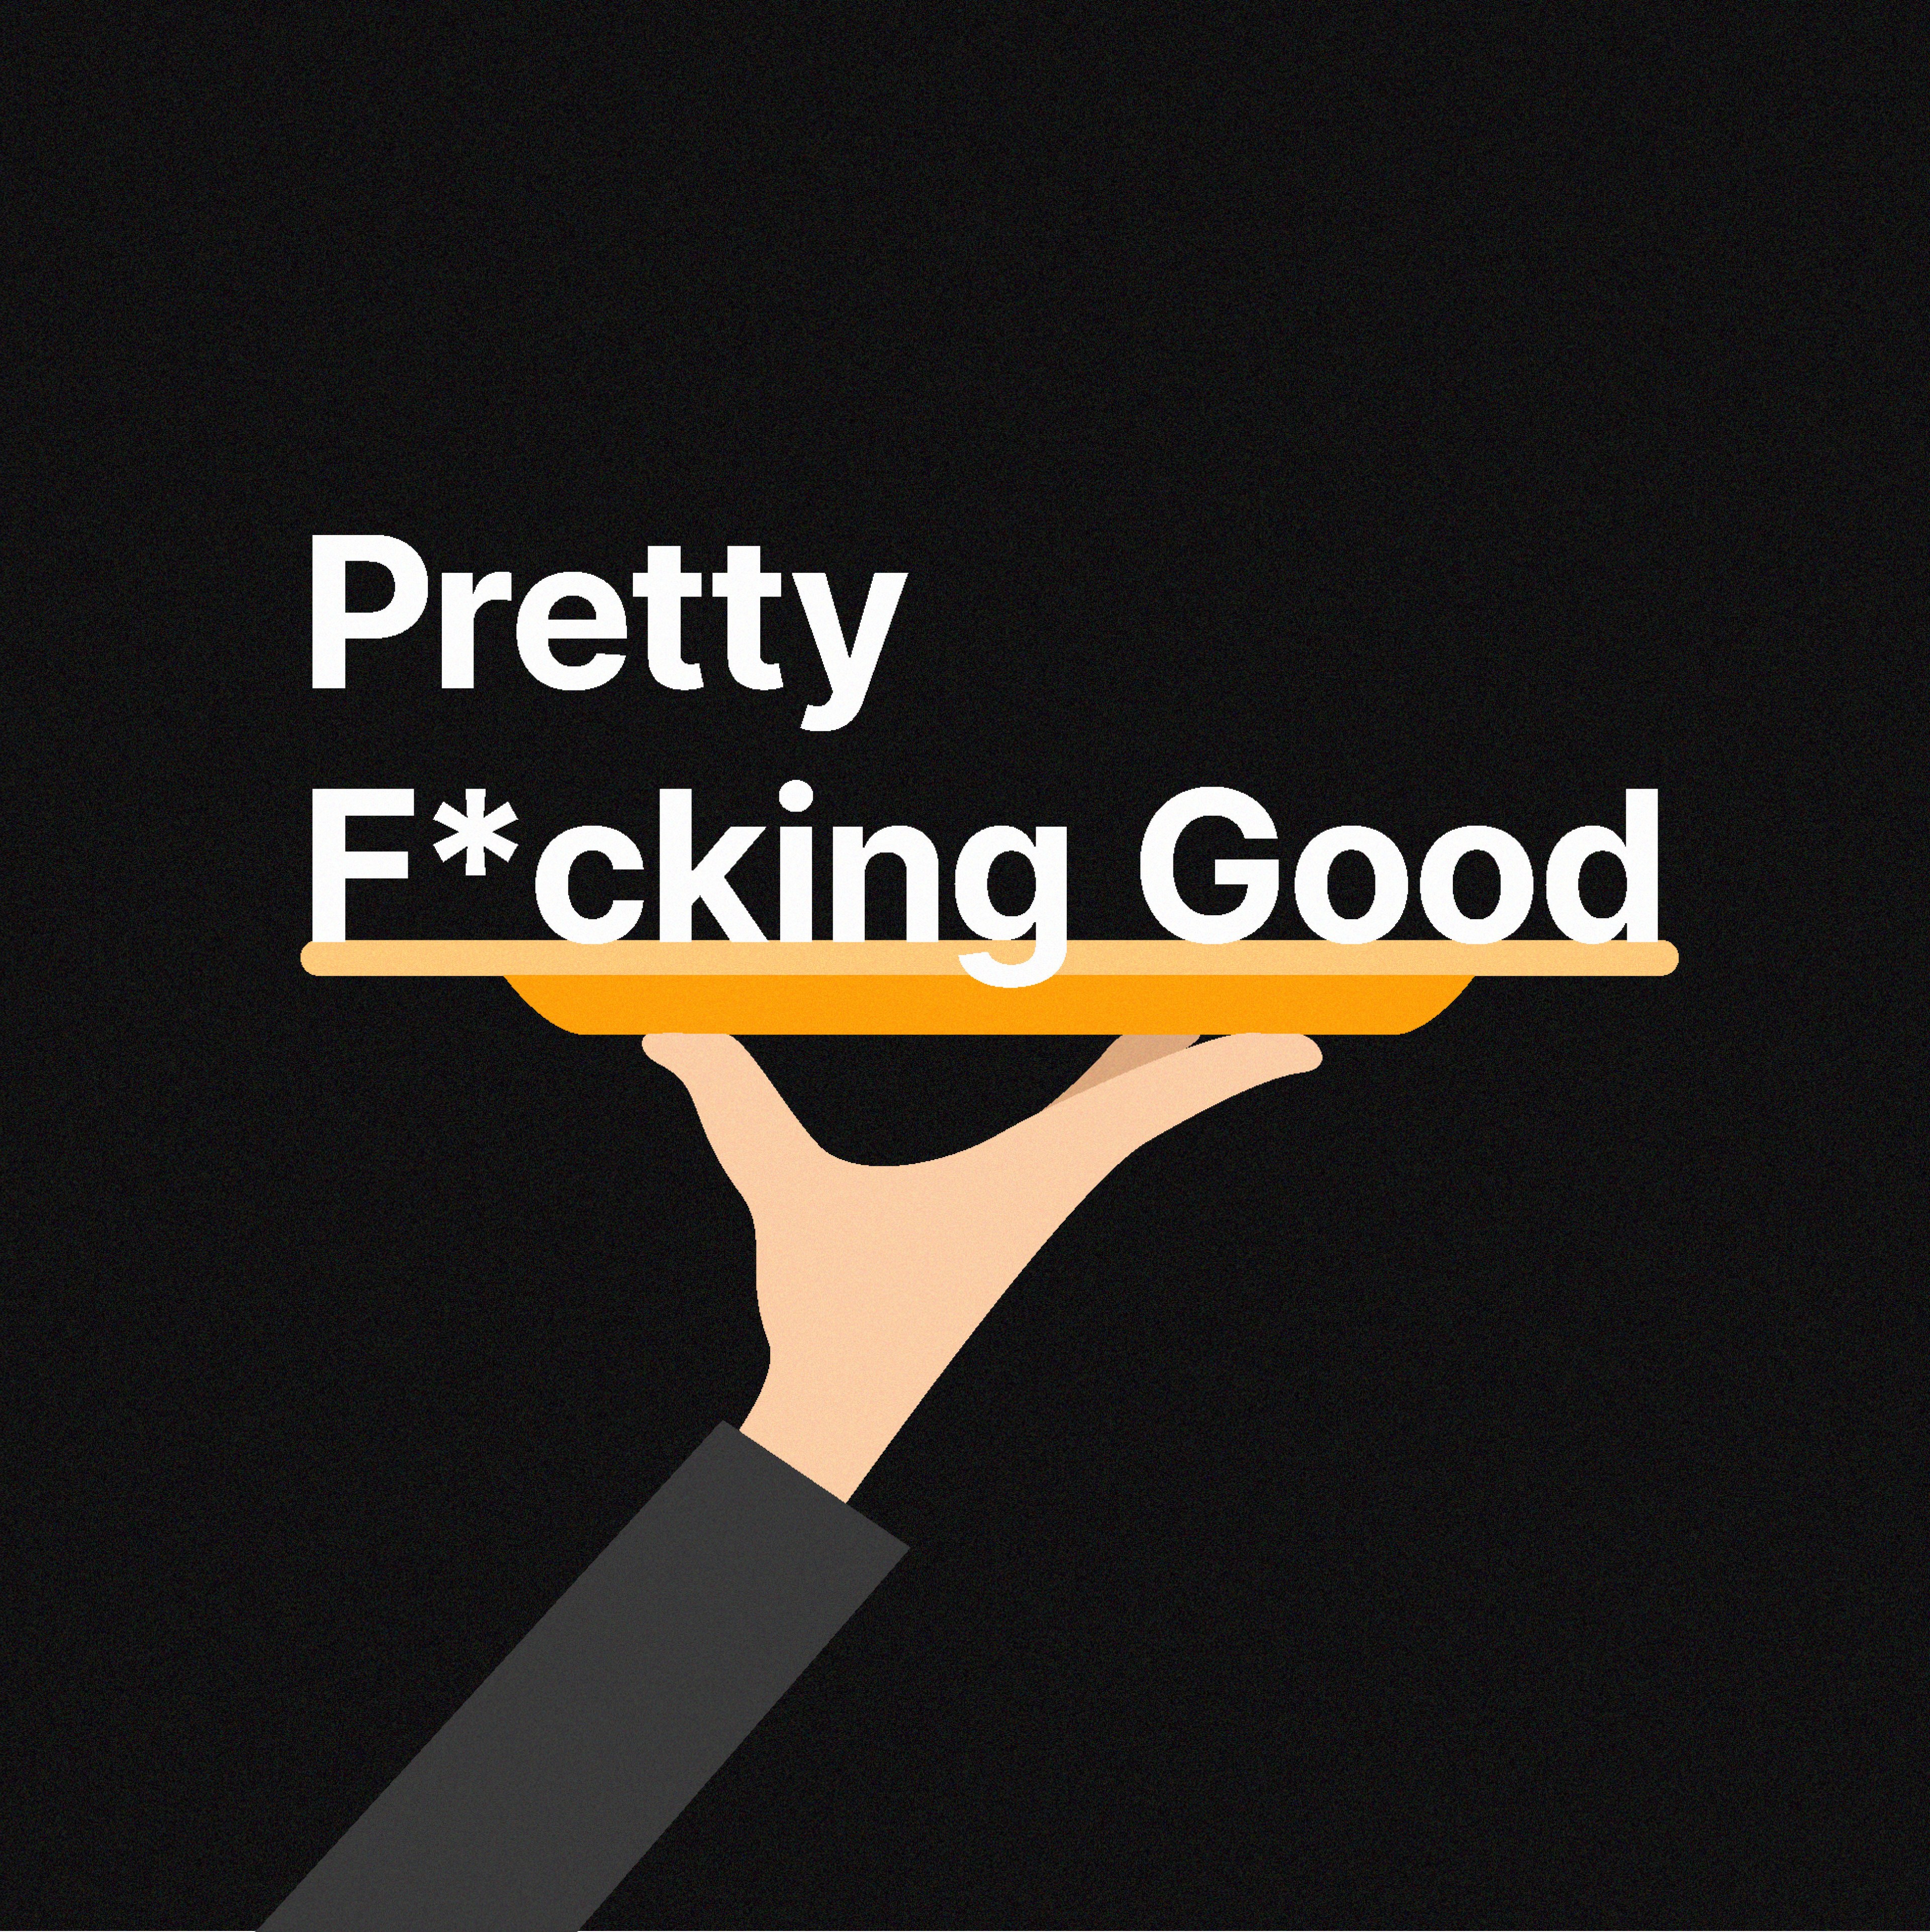 The Pretty F*cking Good logo is a a hand serving up the title on a plate.